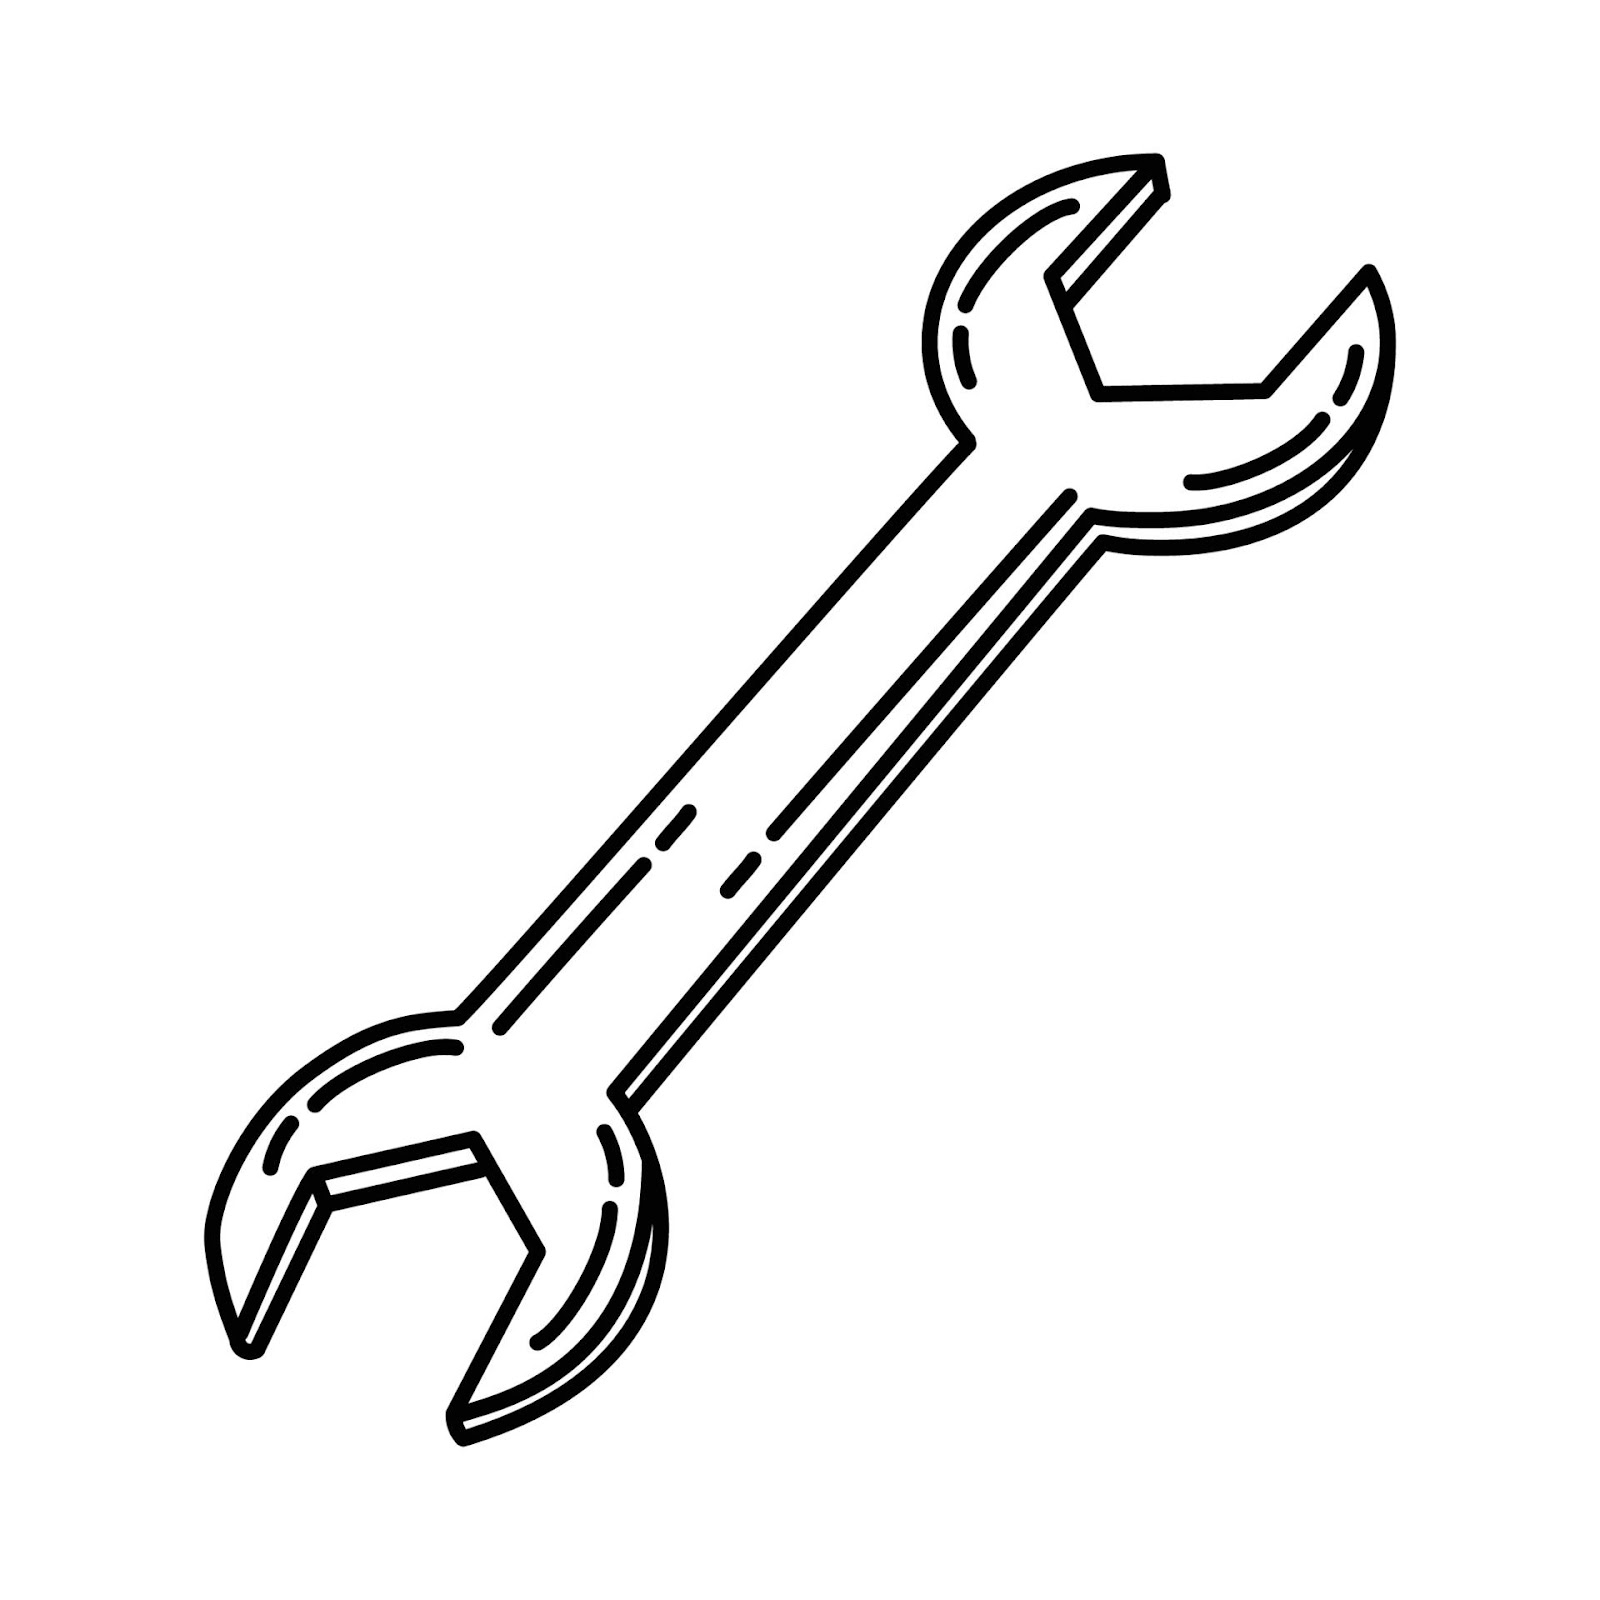 wrenches-icon-doodle-hand-drawn-or-outline-icon-style-vector.jpg